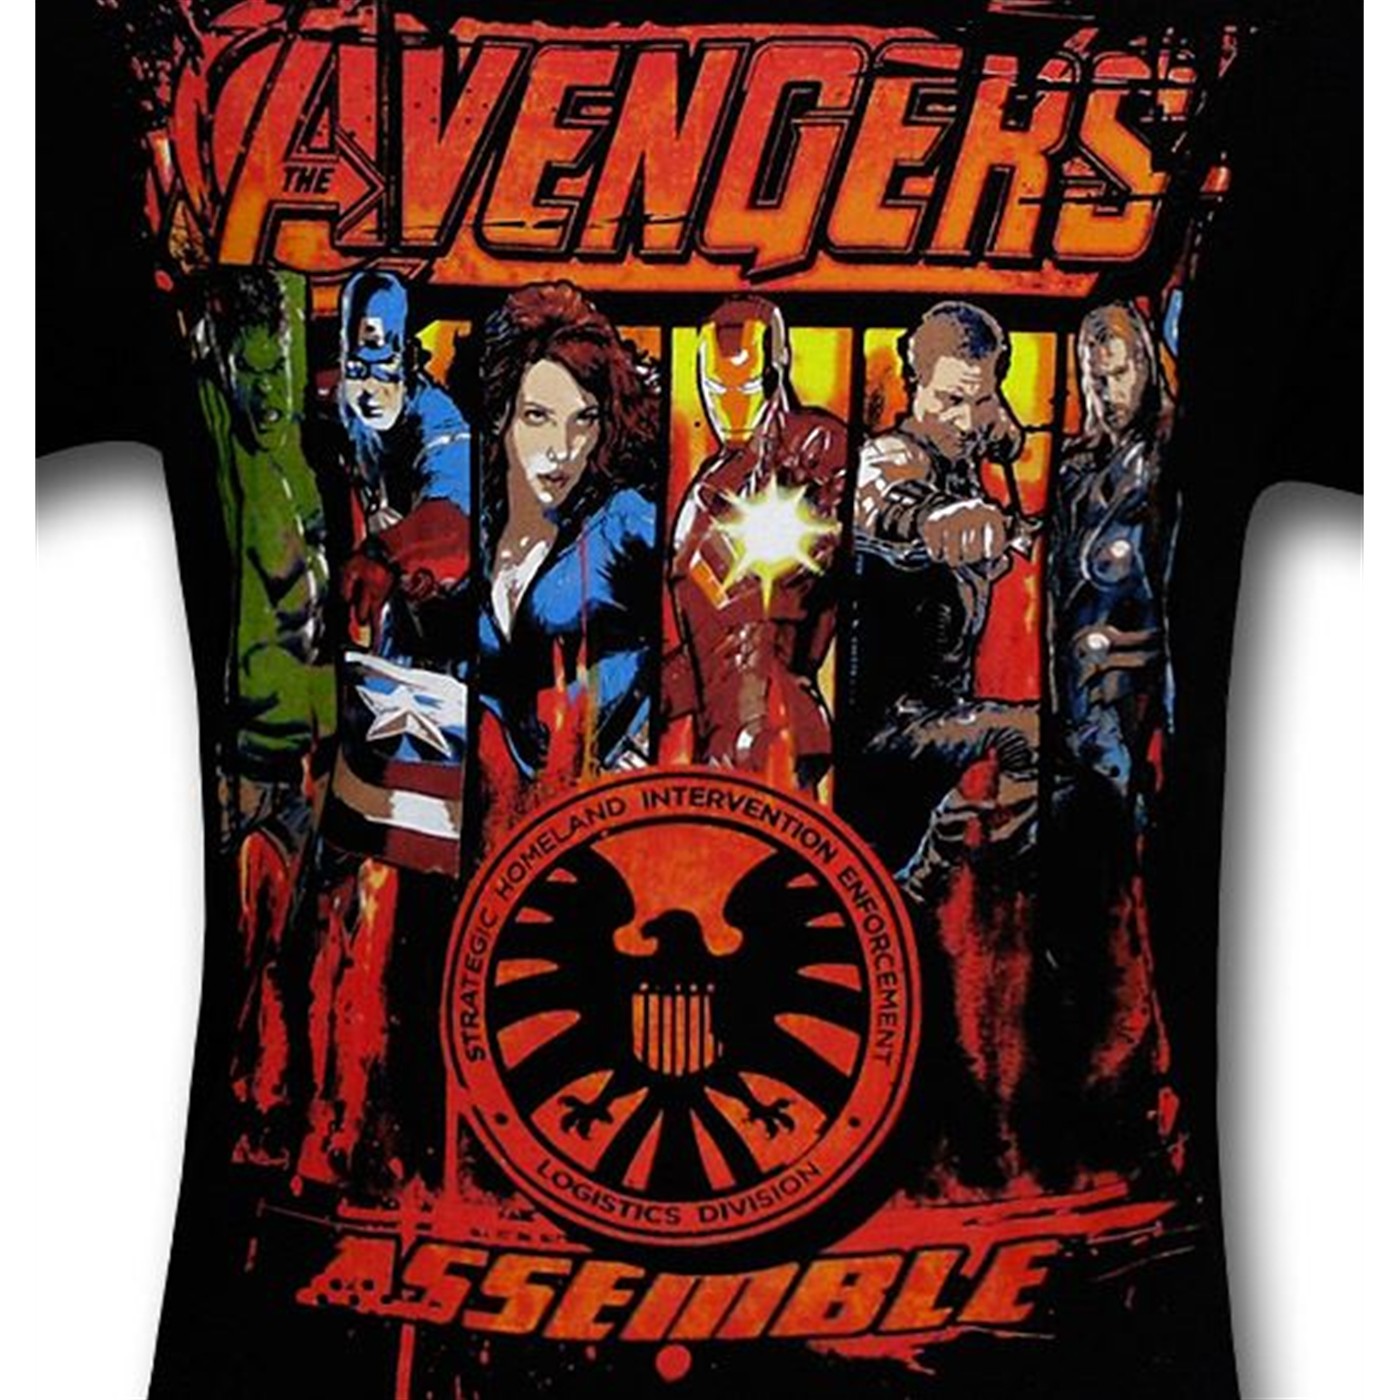 Avengers Movie Roulette Youth T-Shirt